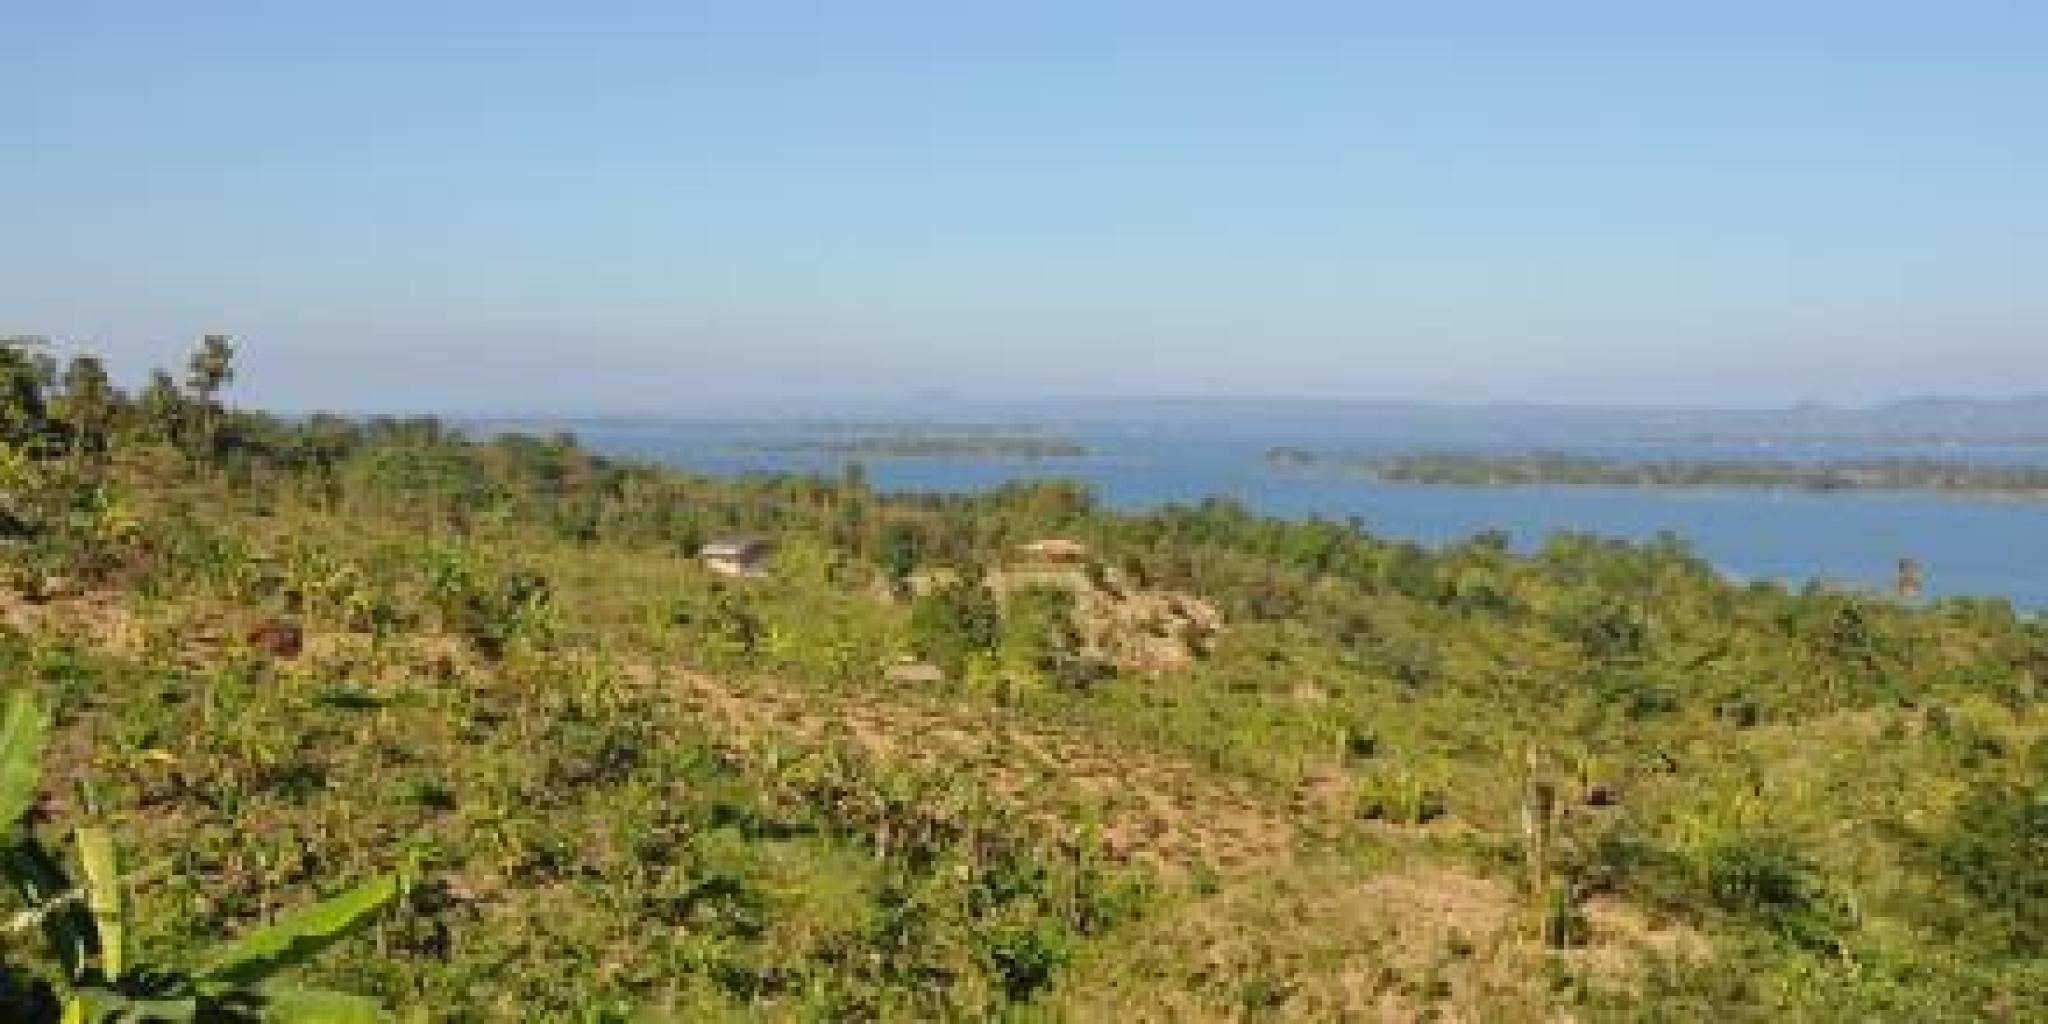 Image credit: View of Kaptai Lake, Chittagong Hill Tracts; supplied by the presenter